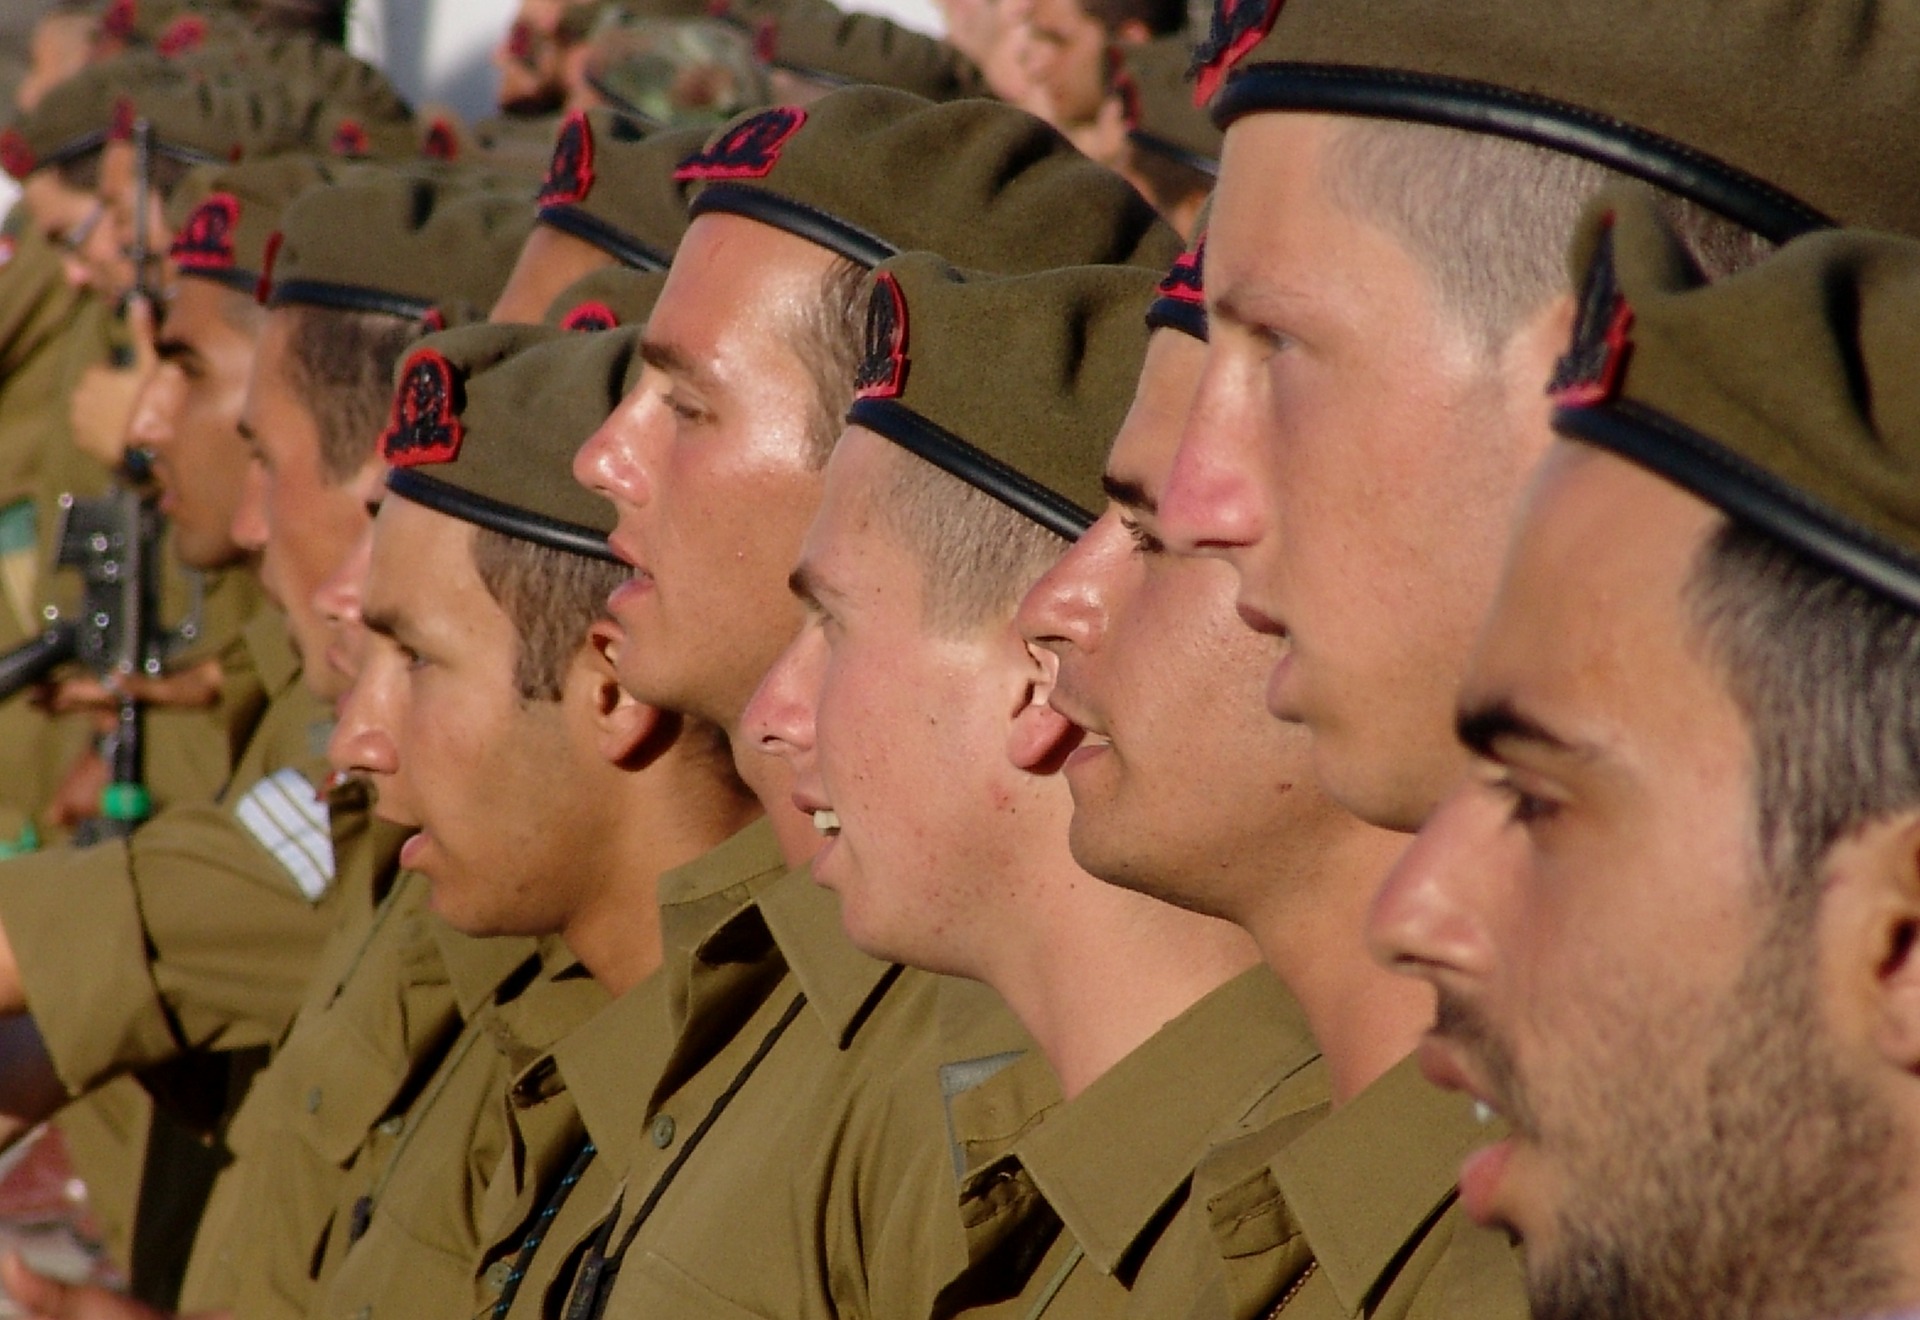 Left for Dead in 1948: The Battle that Shaped Ariel Sharon